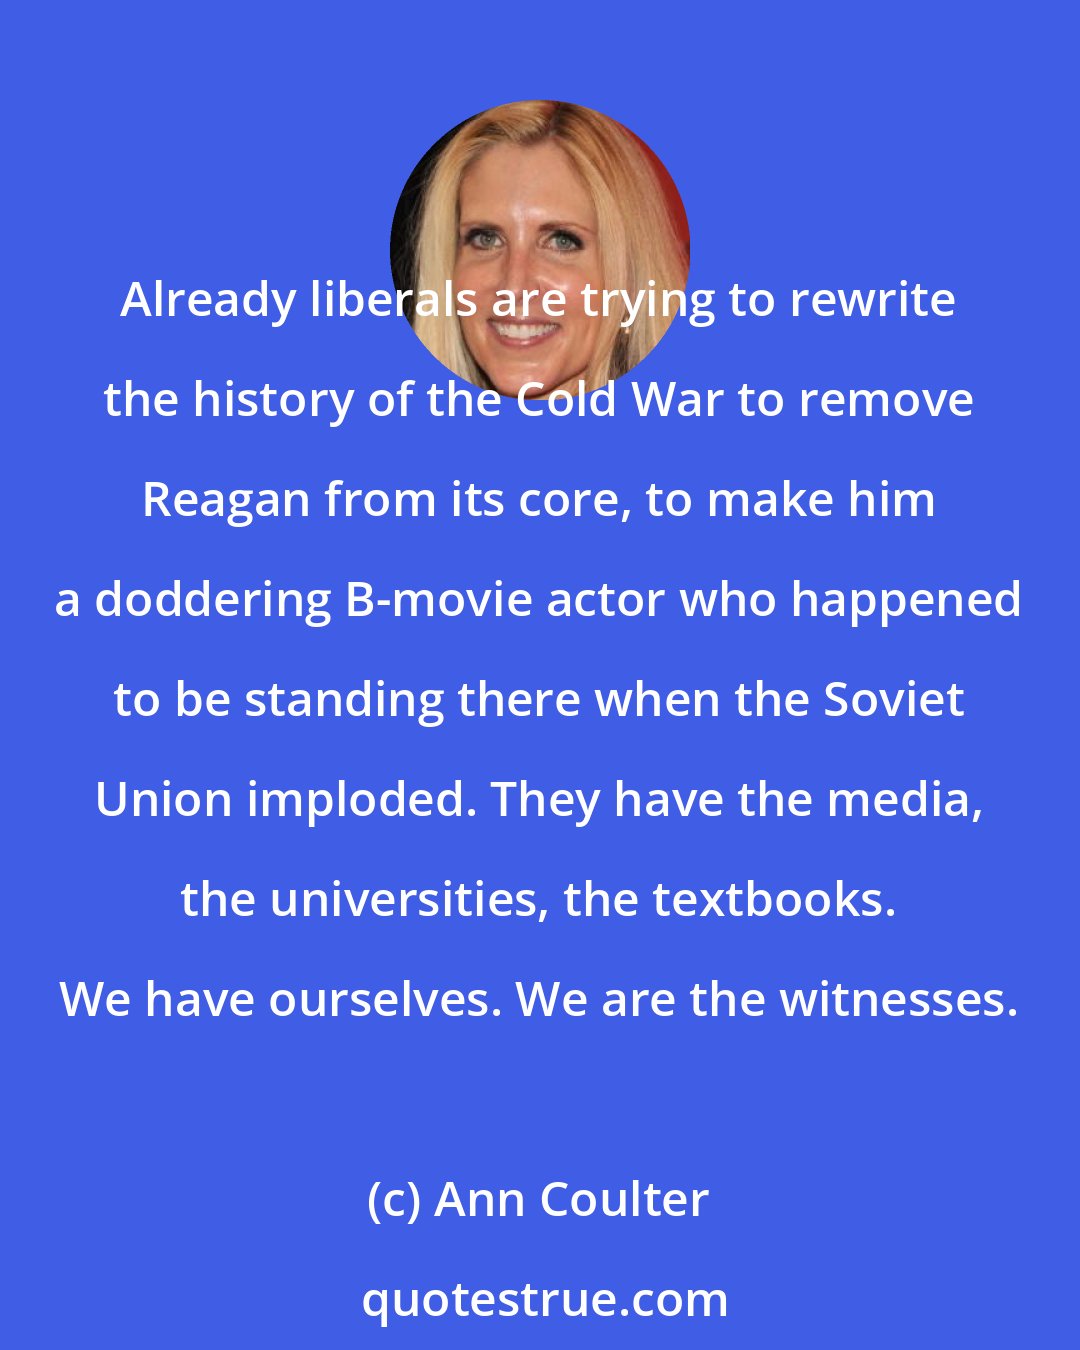 Ann Coulter: Already liberals are trying to rewrite the history of the Cold War to remove Reagan from its core, to make him a doddering B-movie actor who happened to be standing there when the Soviet Union imploded. They have the media, the universities, the textbooks. We have ourselves. We are the witnesses.